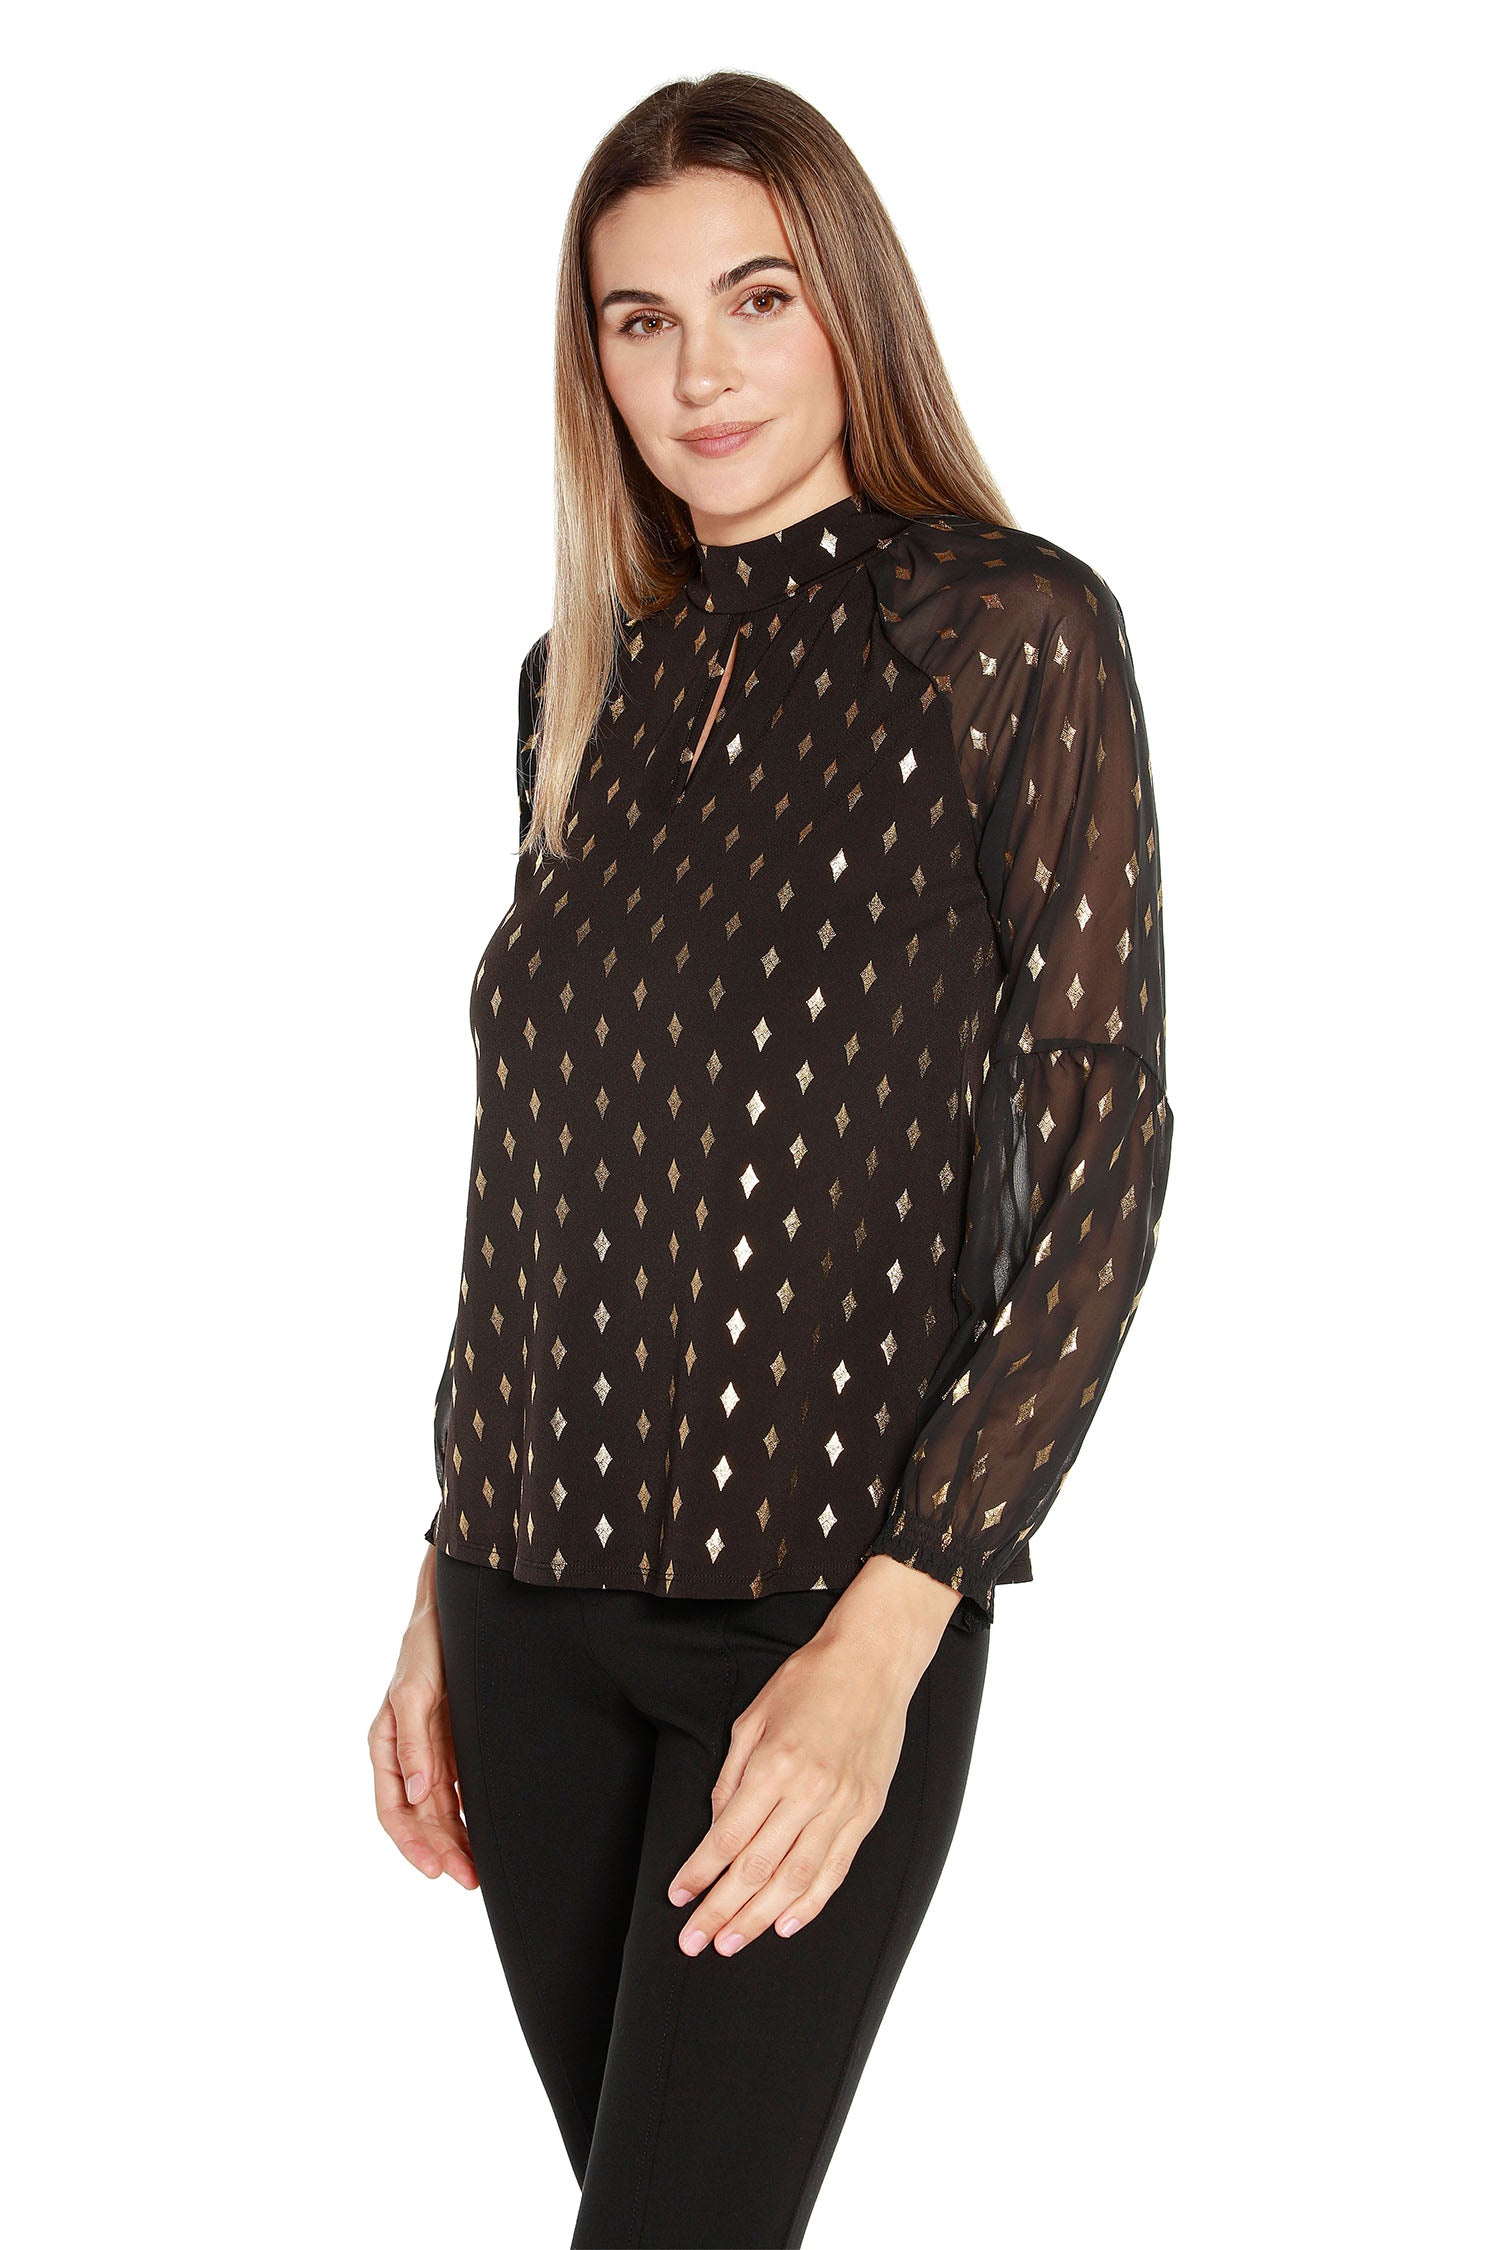 Women's Long Sleeve Tunic With Sheer Sleeves and Front Keyhole in a Gold Diamond Foil Print